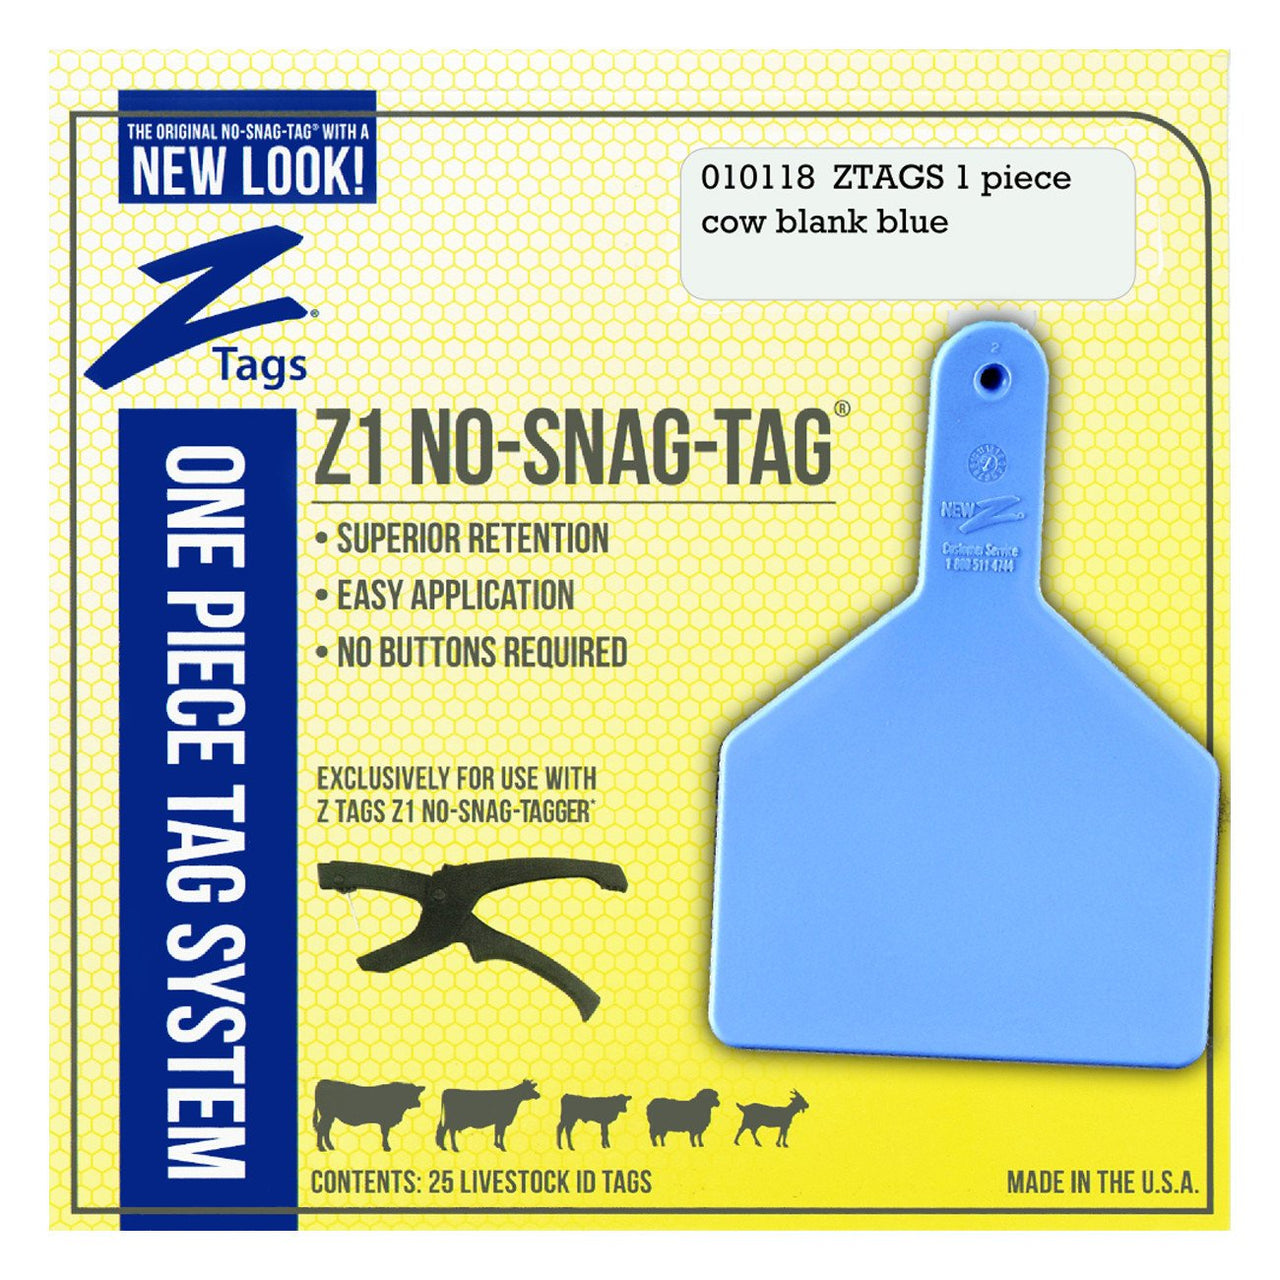 Z Tags 1 Piece Cow Blank (Blue) 25 Pack - 1 Piece Cow Identification Blank Tag Z Tags - Canada